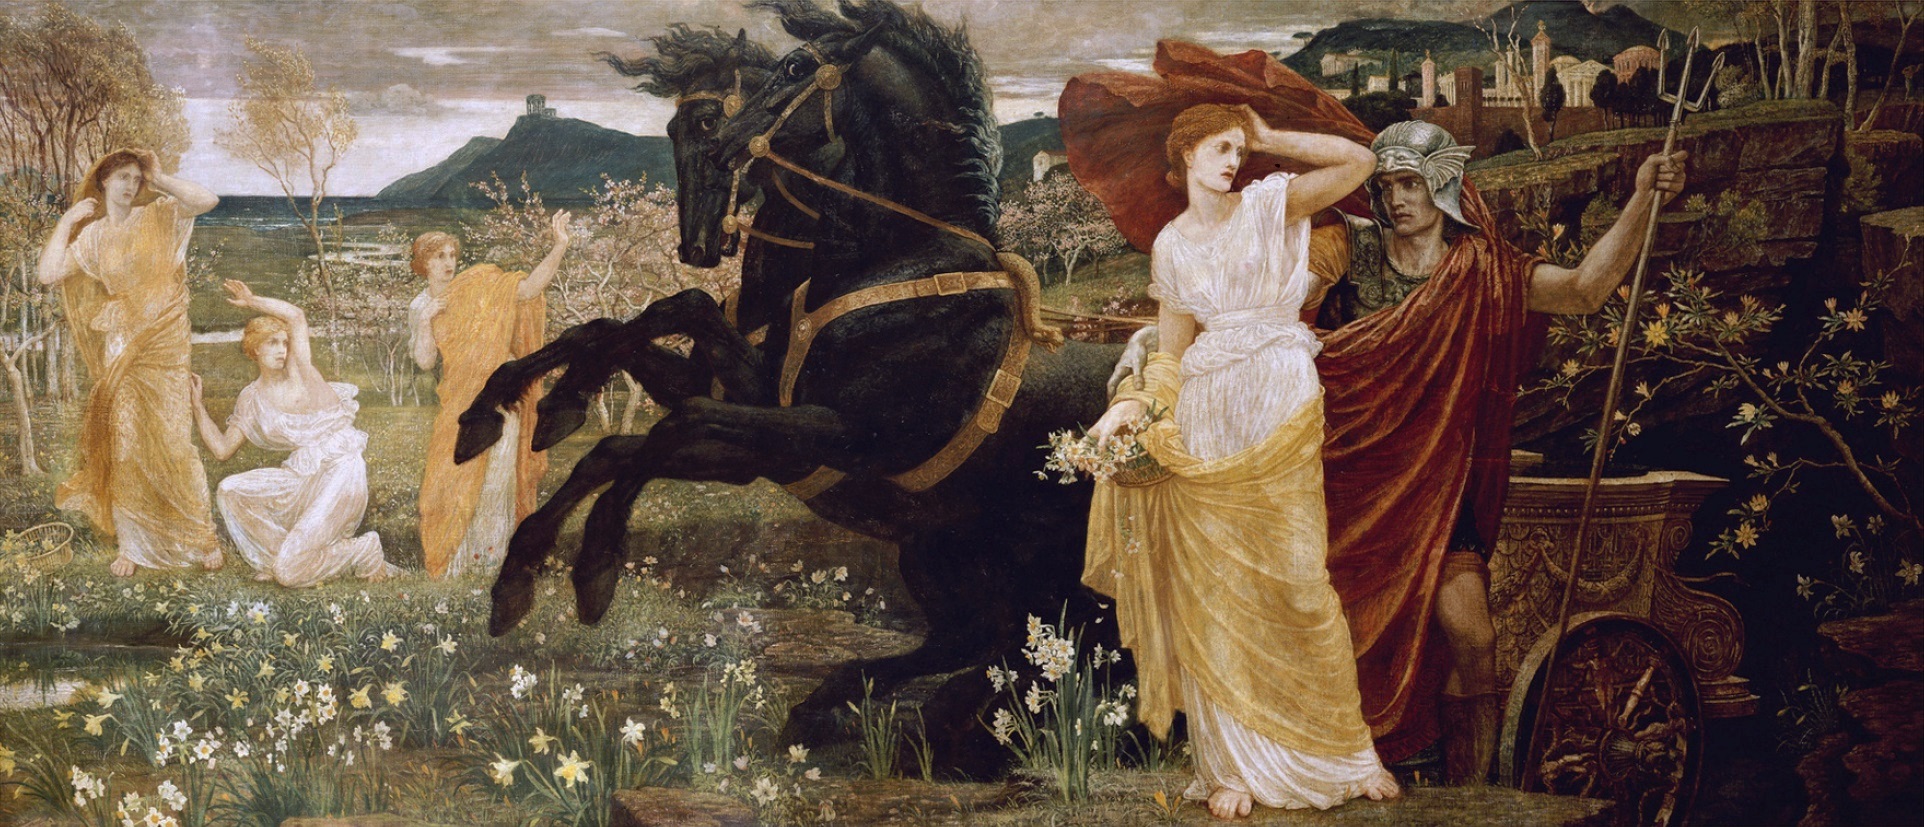 The Fate of Persephone, 1877 (oil &amp; tempera on canvas)